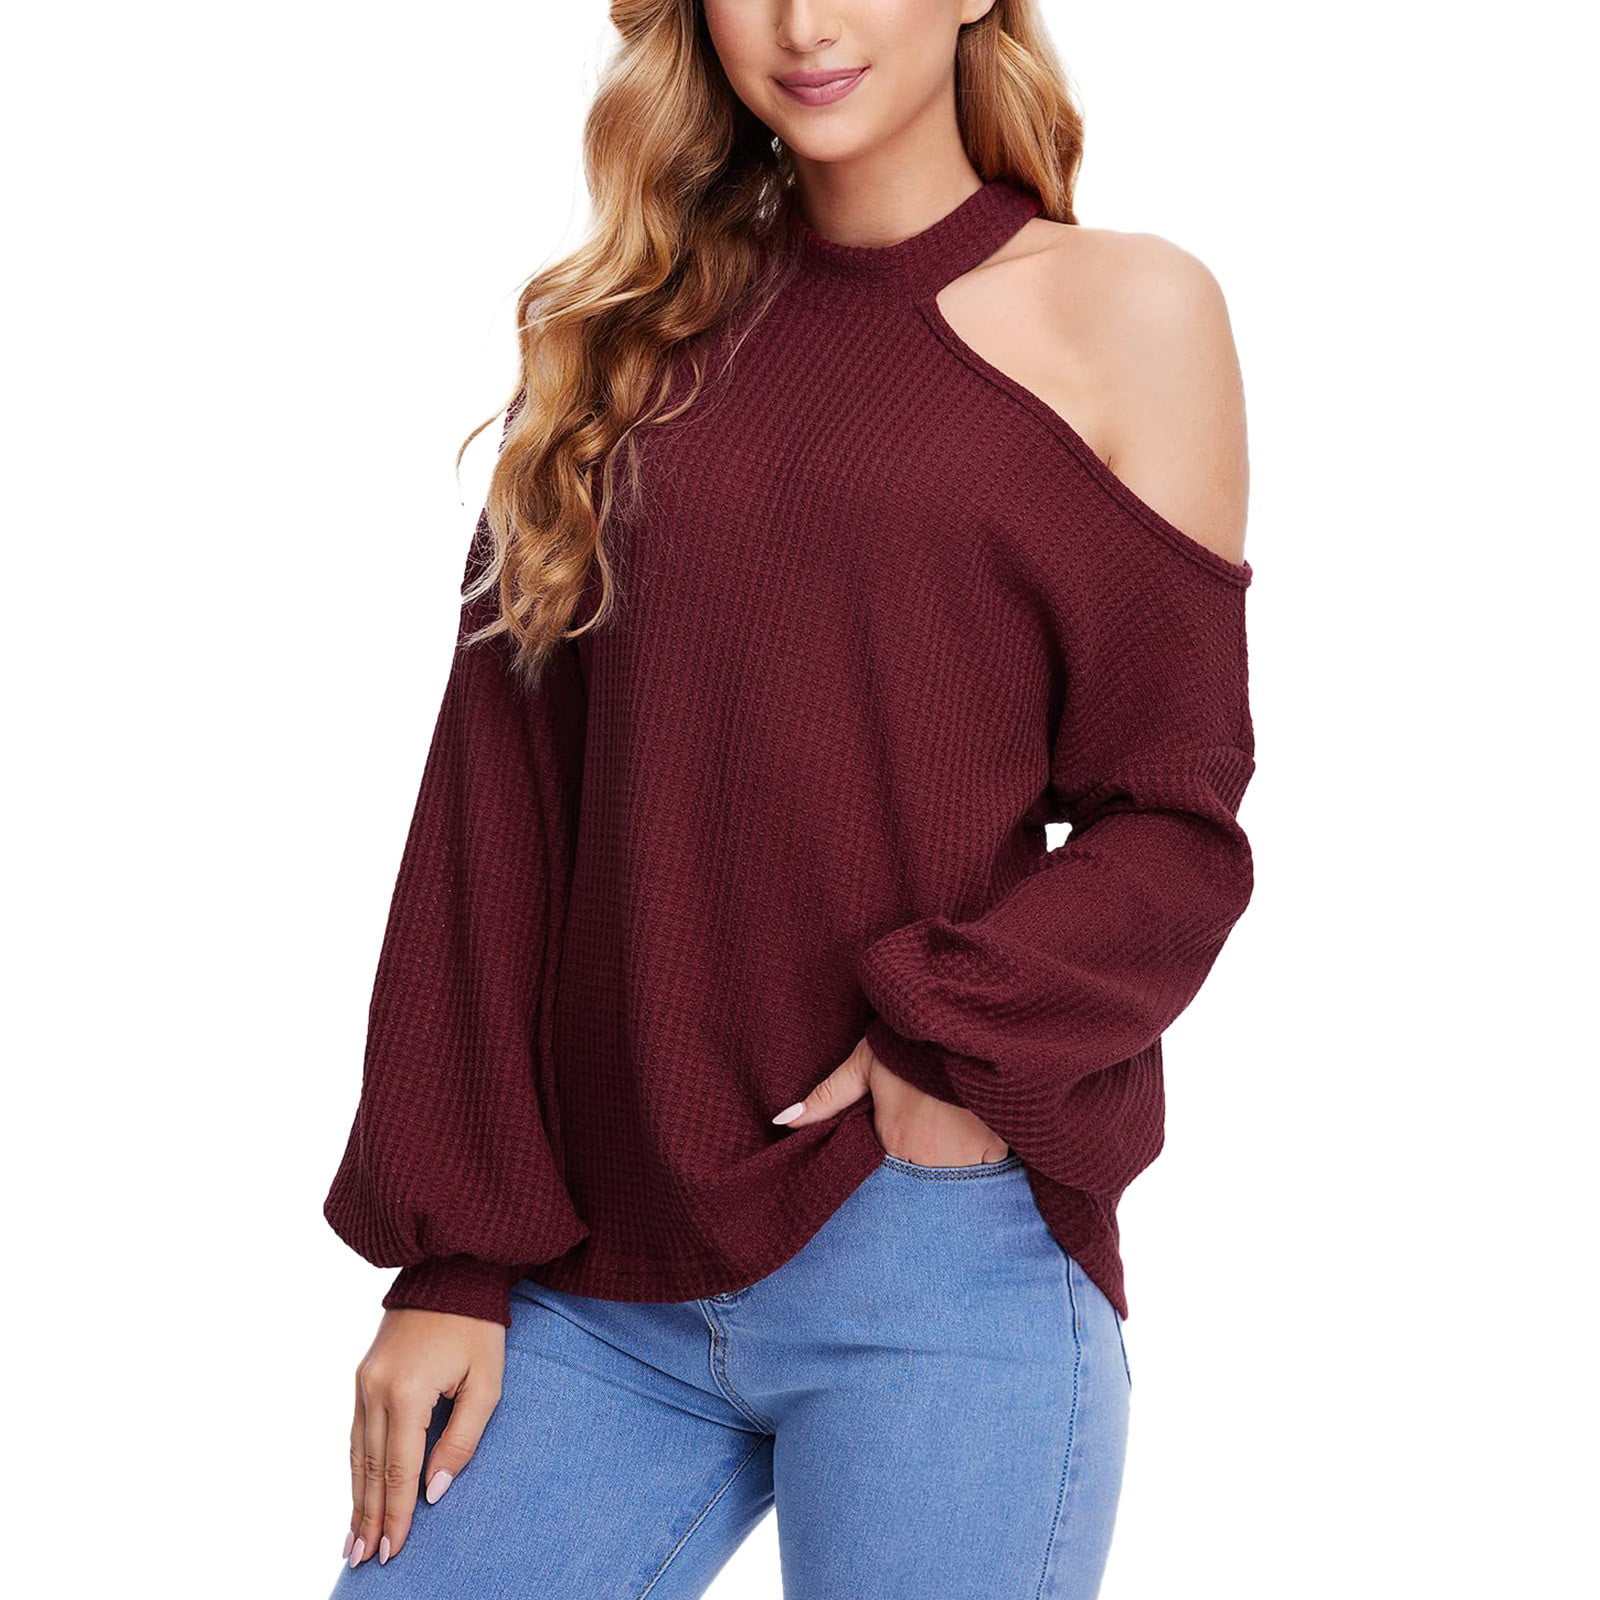 Womens Oversized Sweaters Sweater for Elderly Women Womens Crew Neck Cold Shoulder Sweaters Sleeve Knit Pullover Sweater Tops Walmart.com